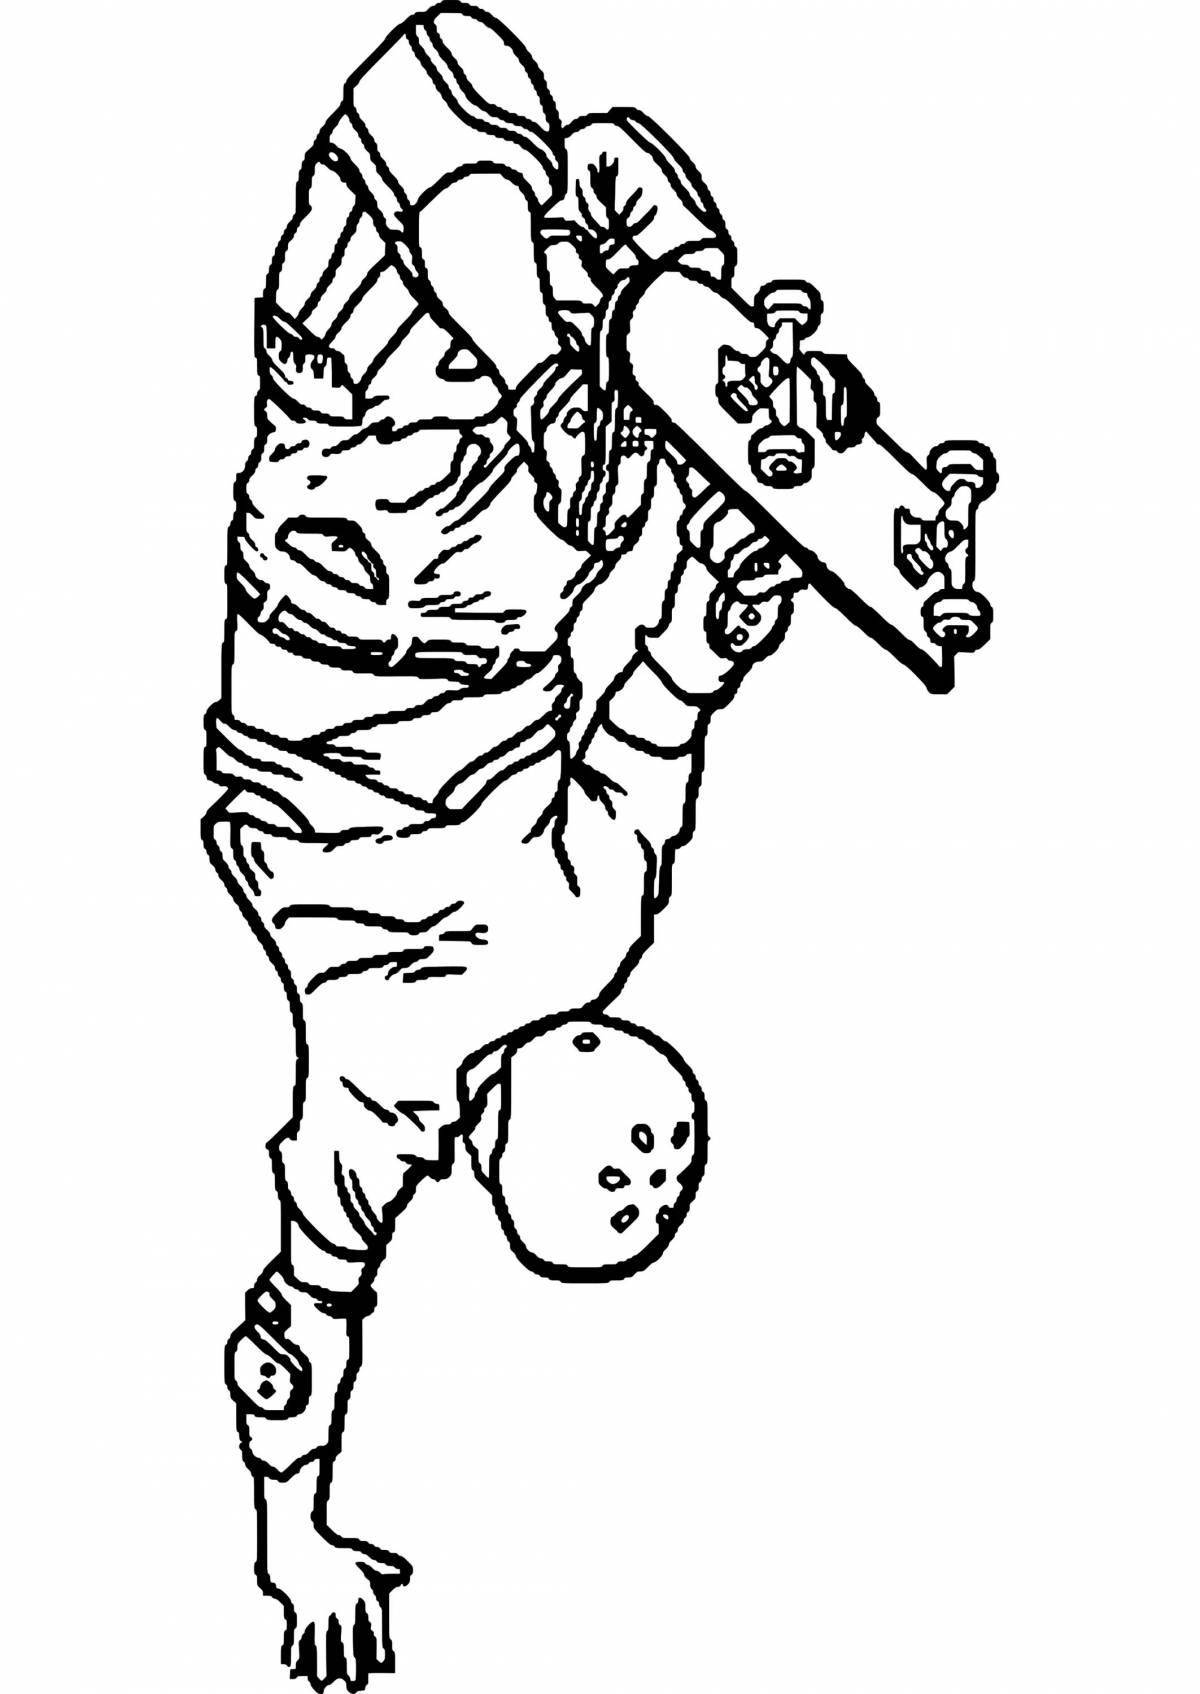 Coloring page of a trendy skateboarder